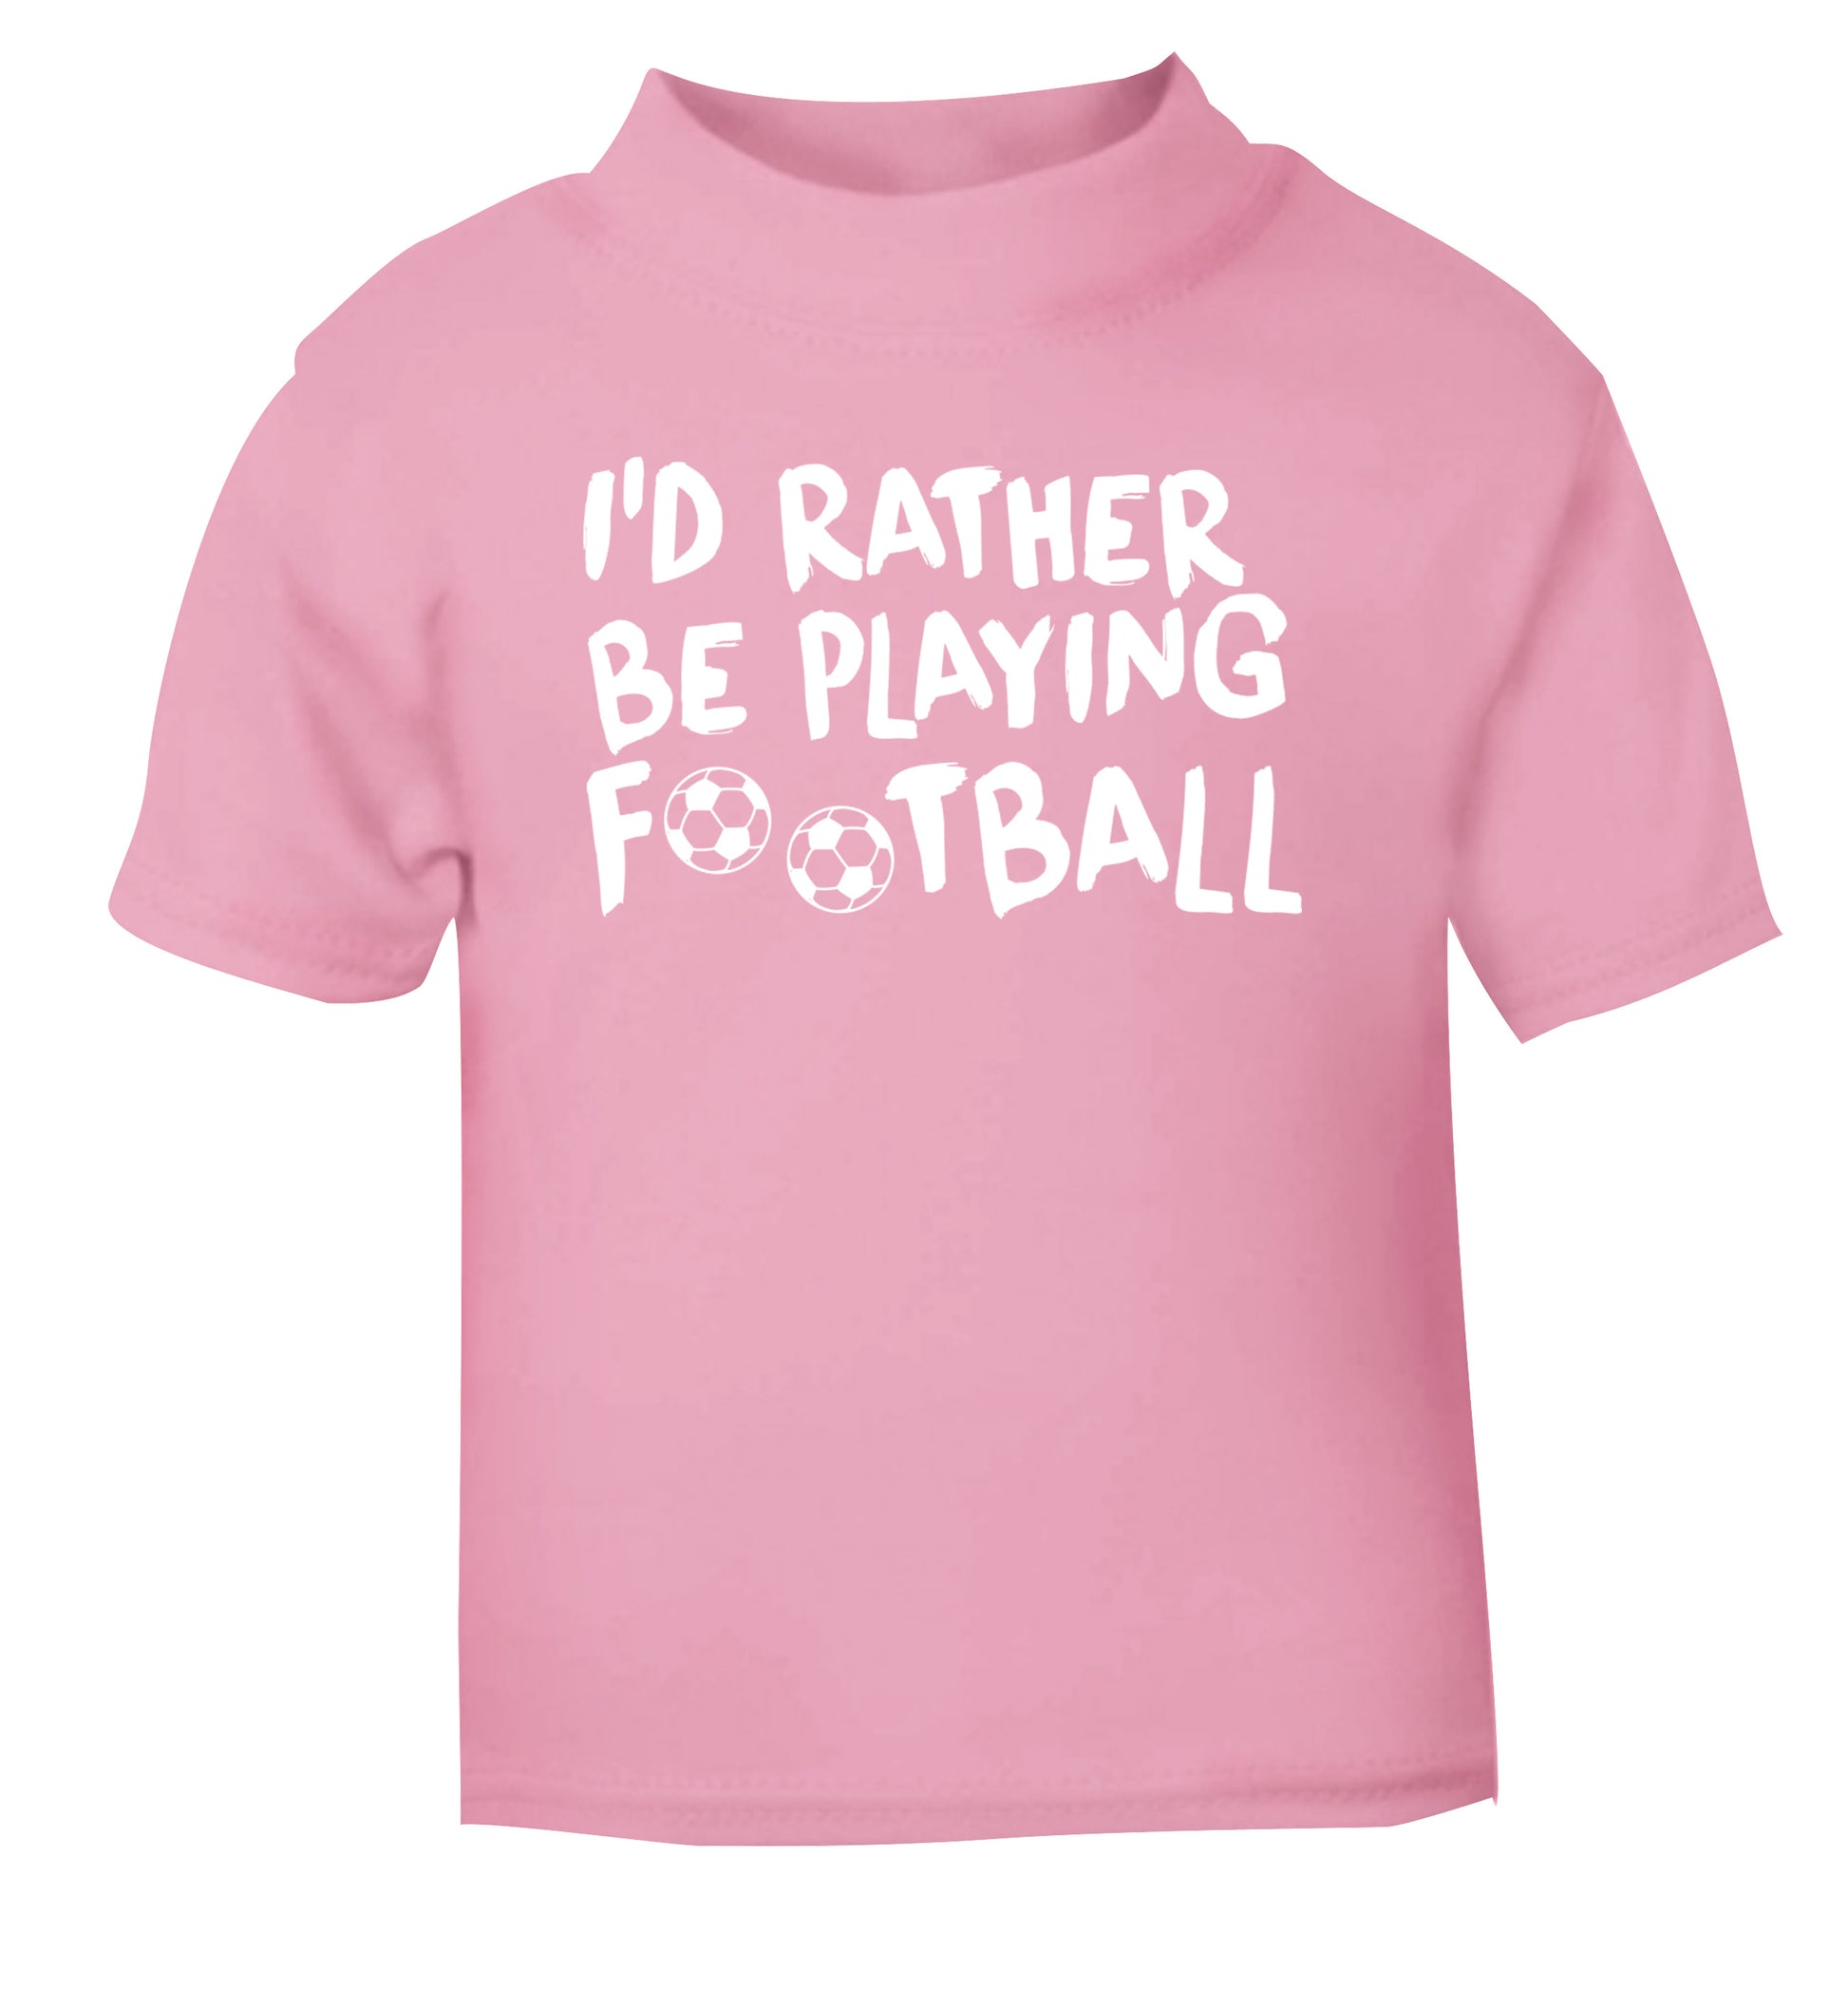 I'd rather be playing football light pink Baby Toddler Tshirt 2 Years